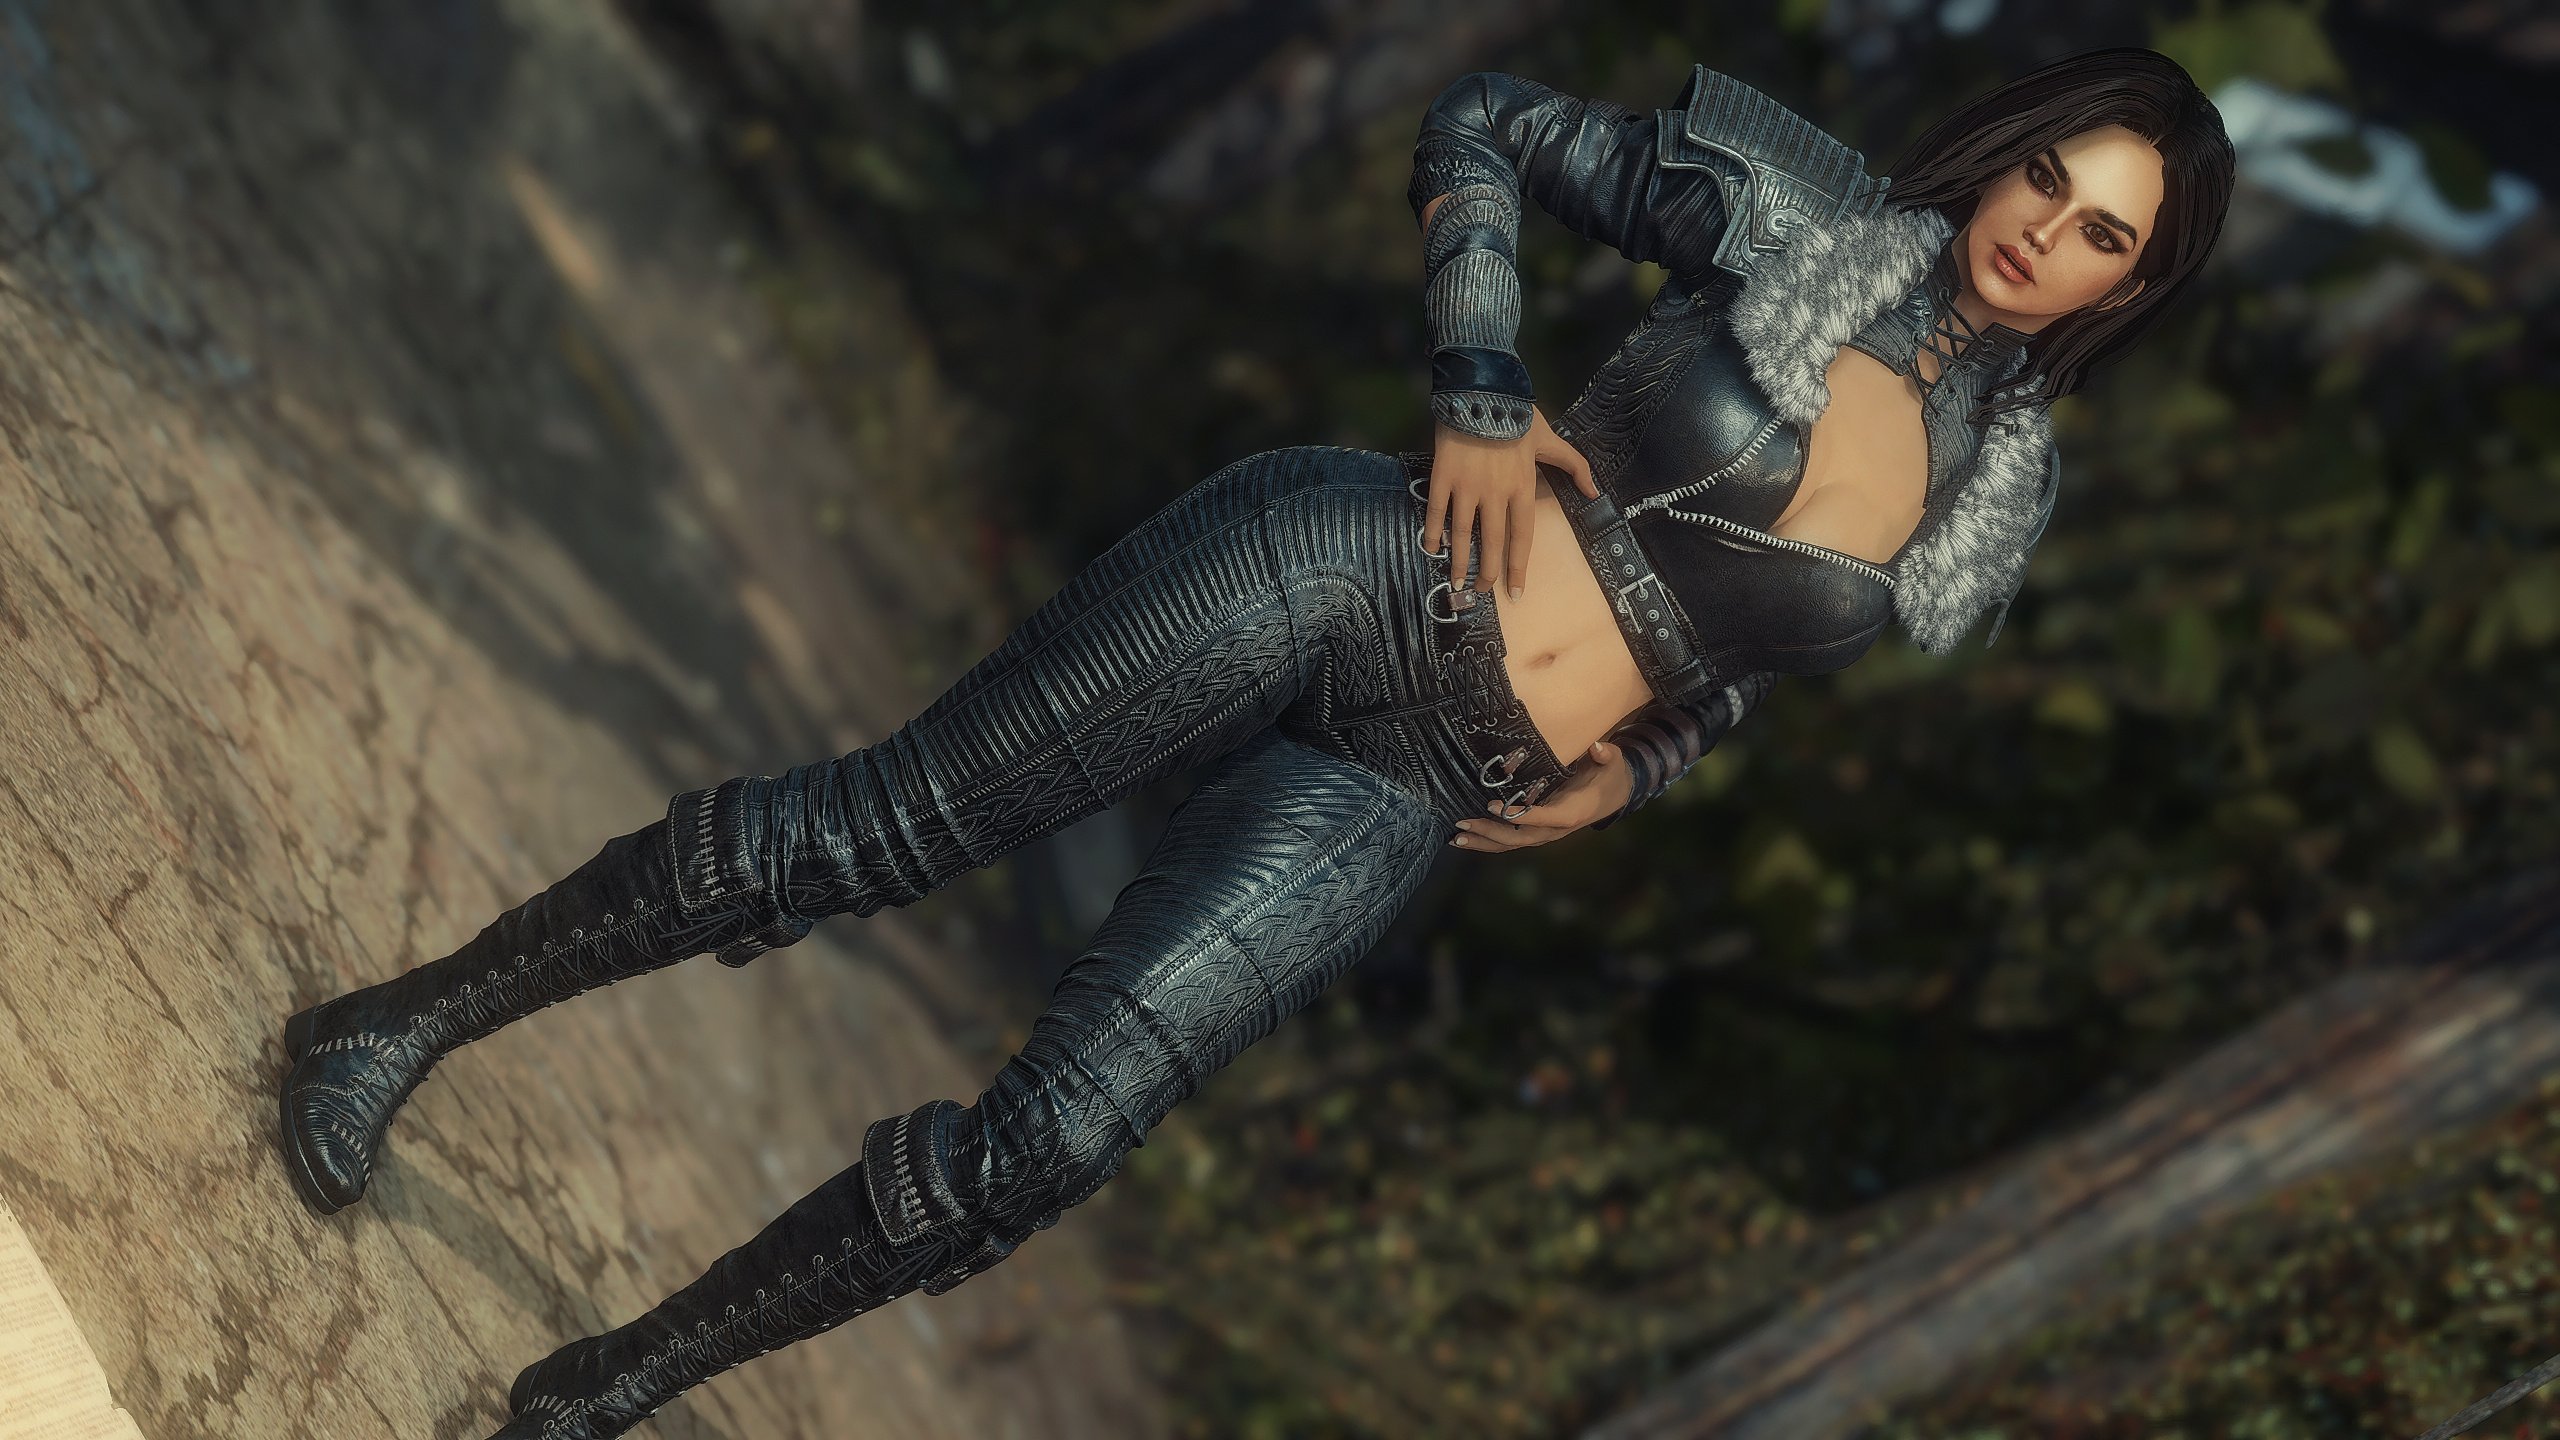 Vtaw workshop fallout 4 clothing armor mods фото 117